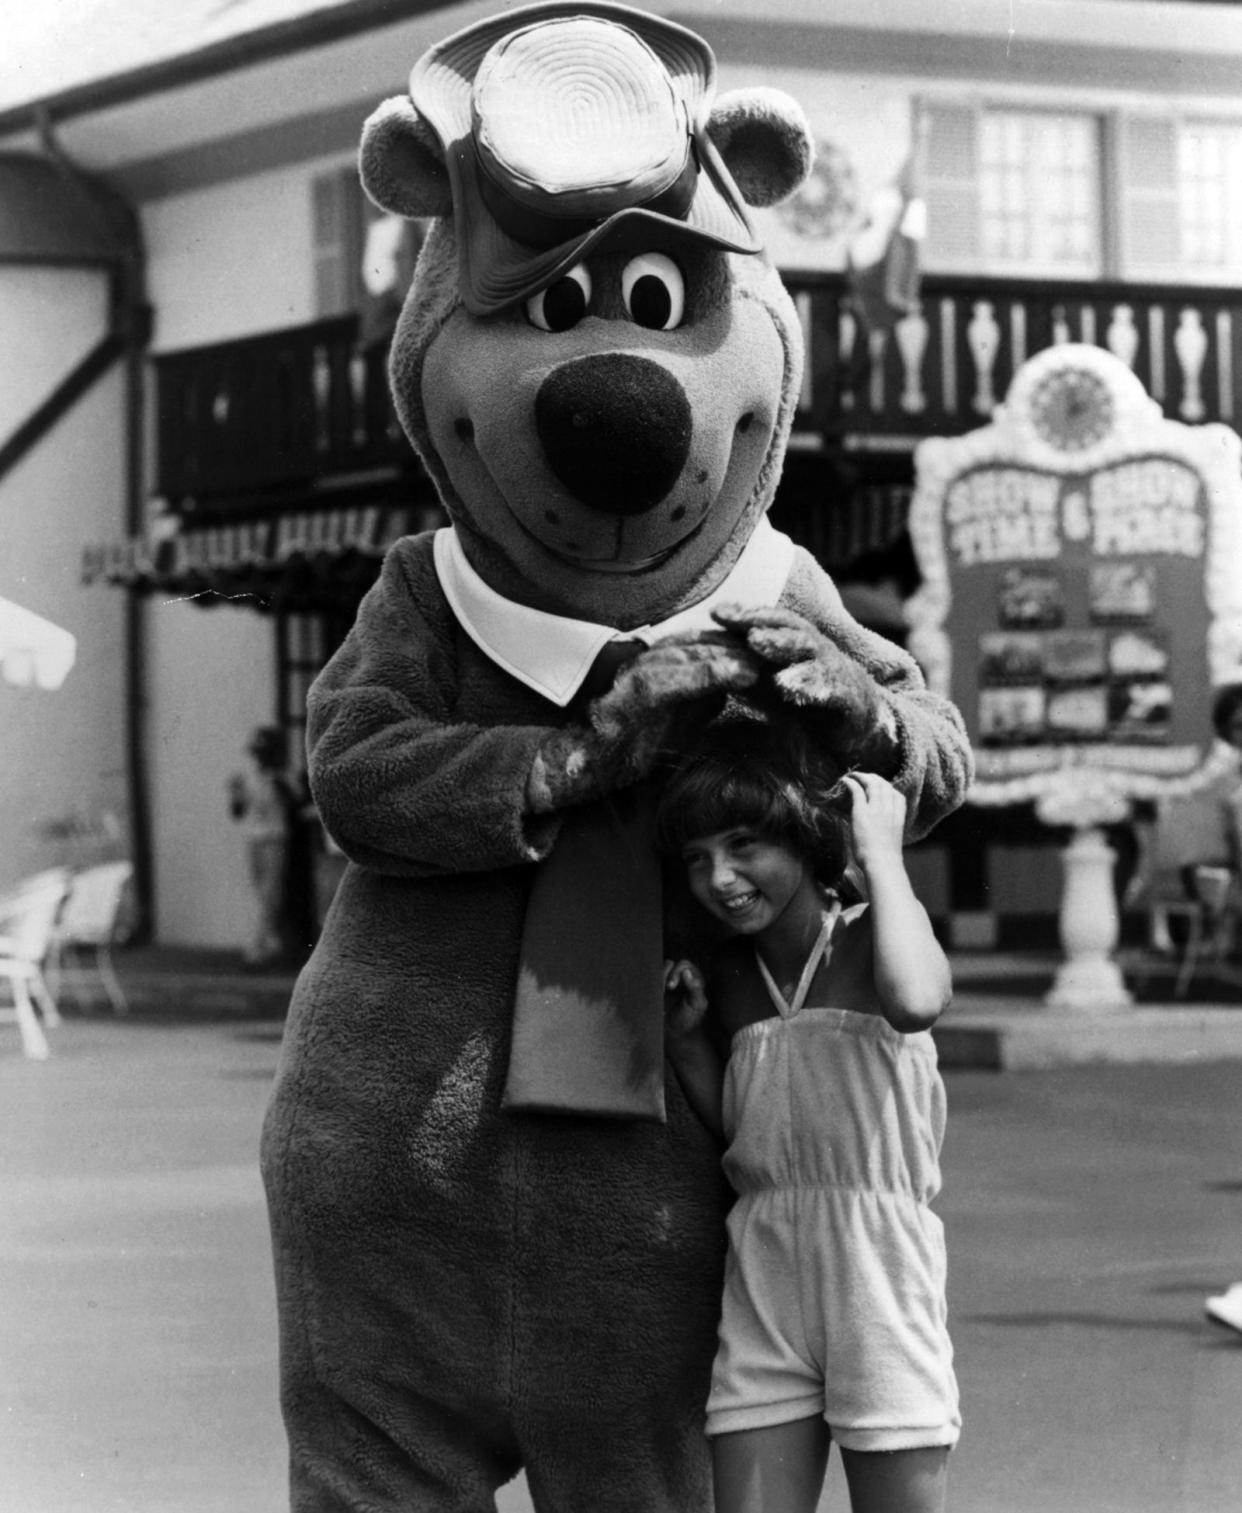 Yogi Bear was one of 15 delightful Hanna-Barbera characters that greeted young visitors to Kings Island.